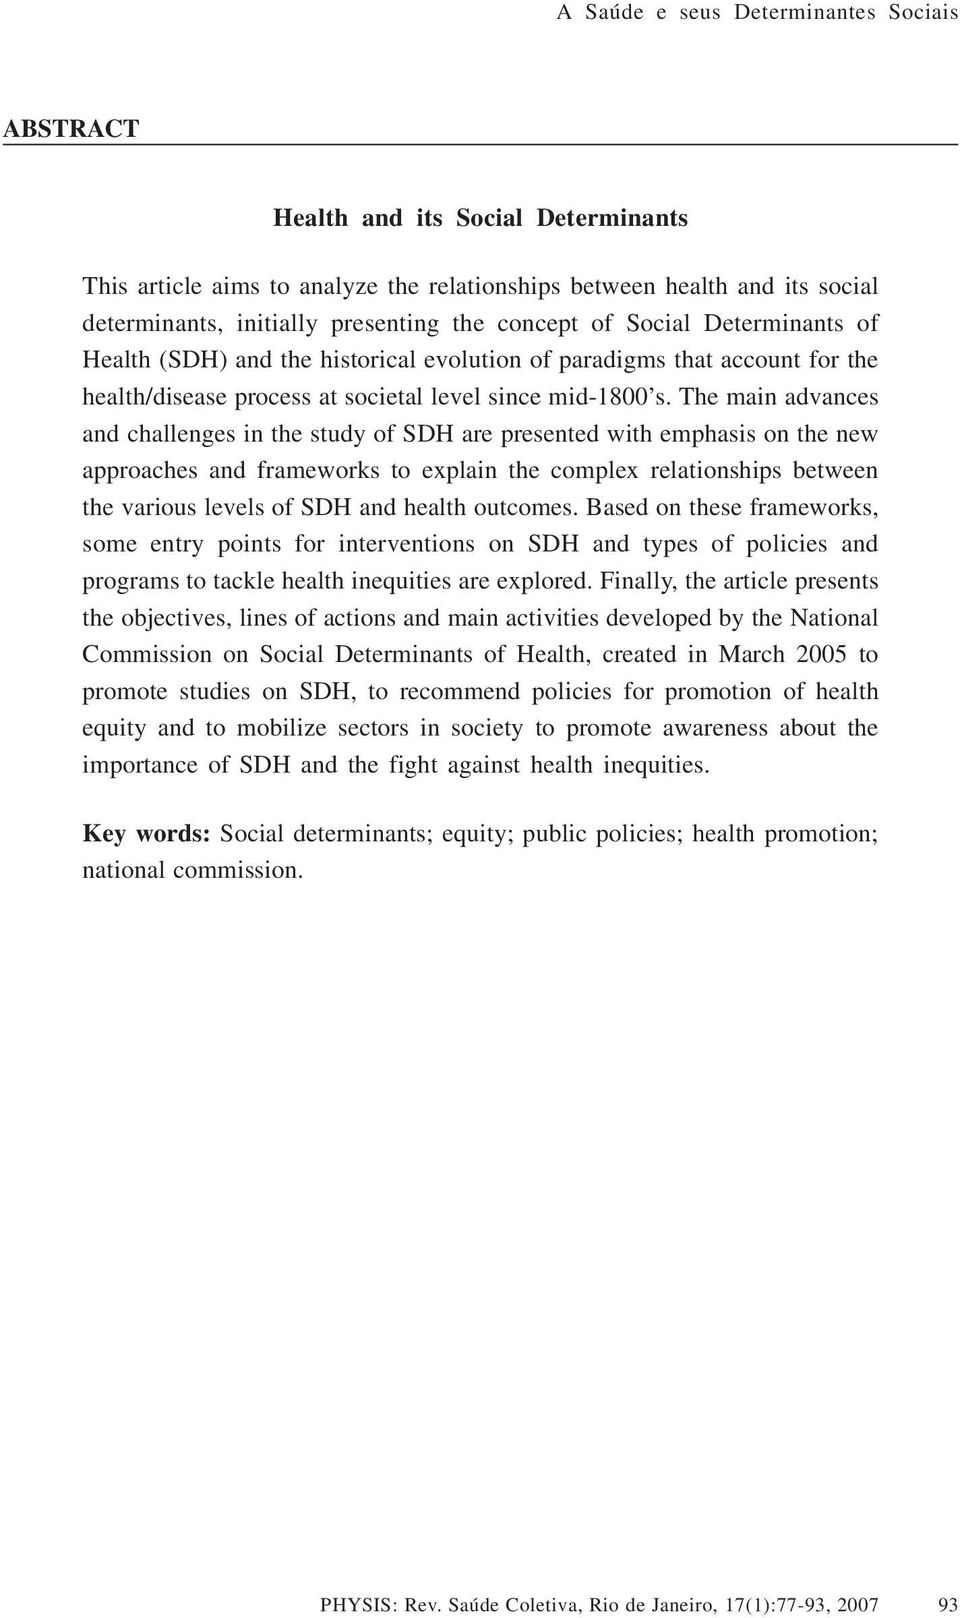 The main advances and challenges in the study of SDH are presented with emphasis on the new approaches and frameworks to explain the complex relationships between the various levels of SDH and health